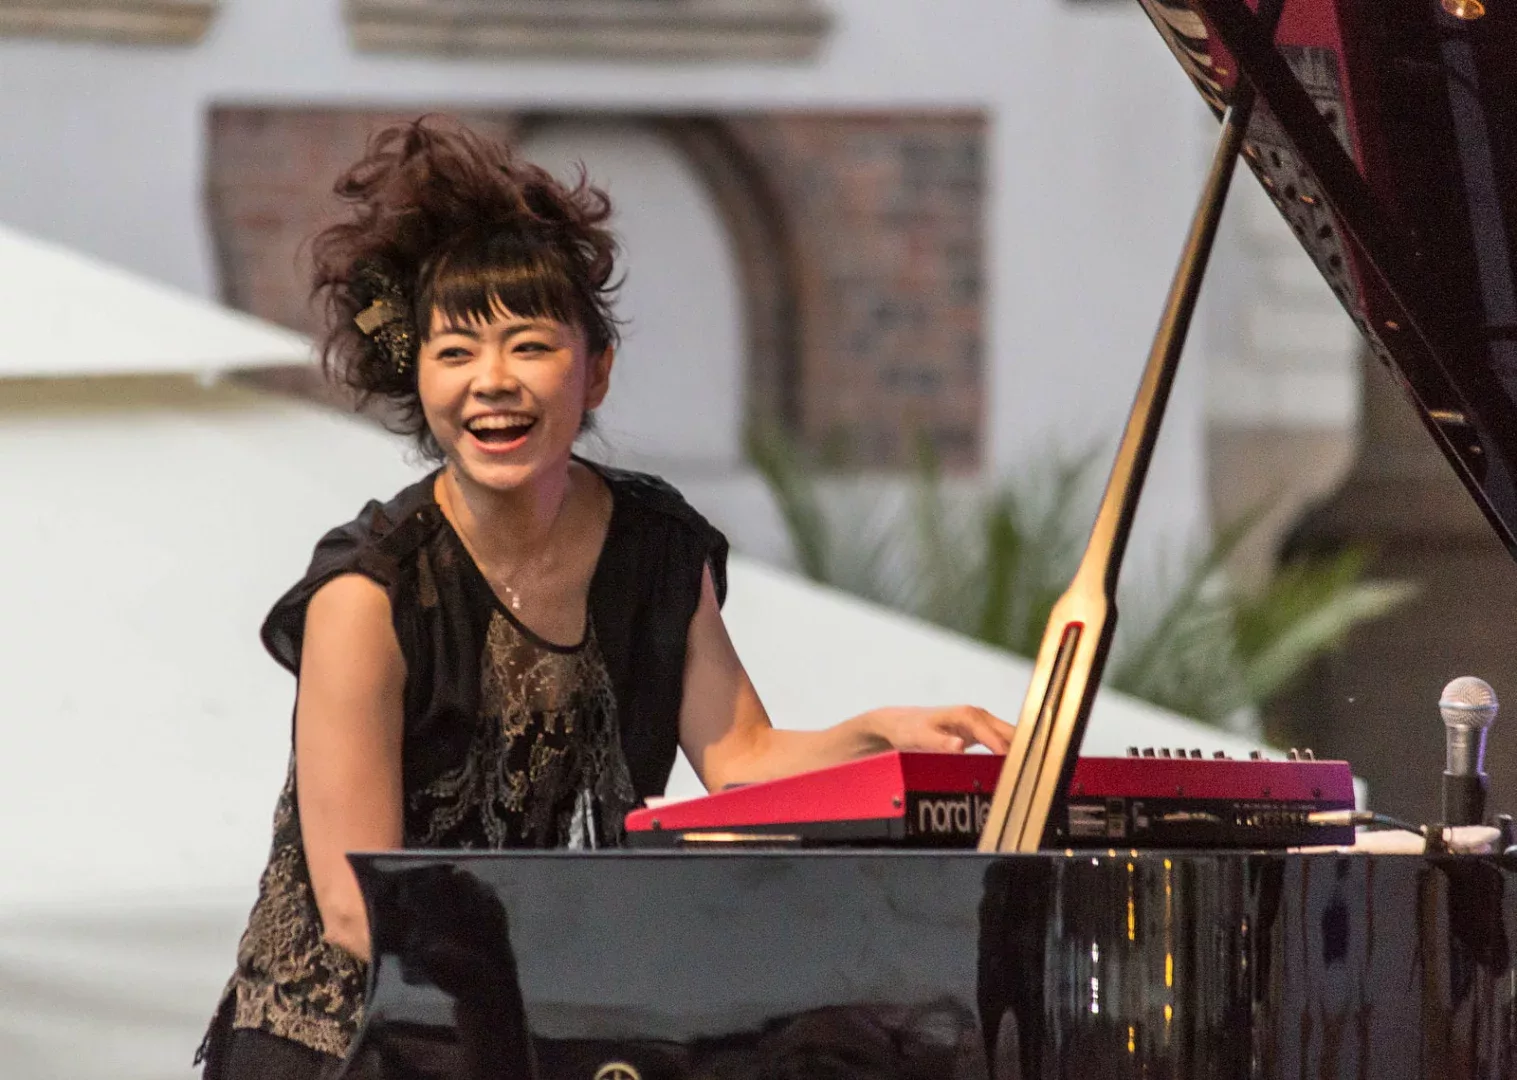 Hiromi pianists on stage